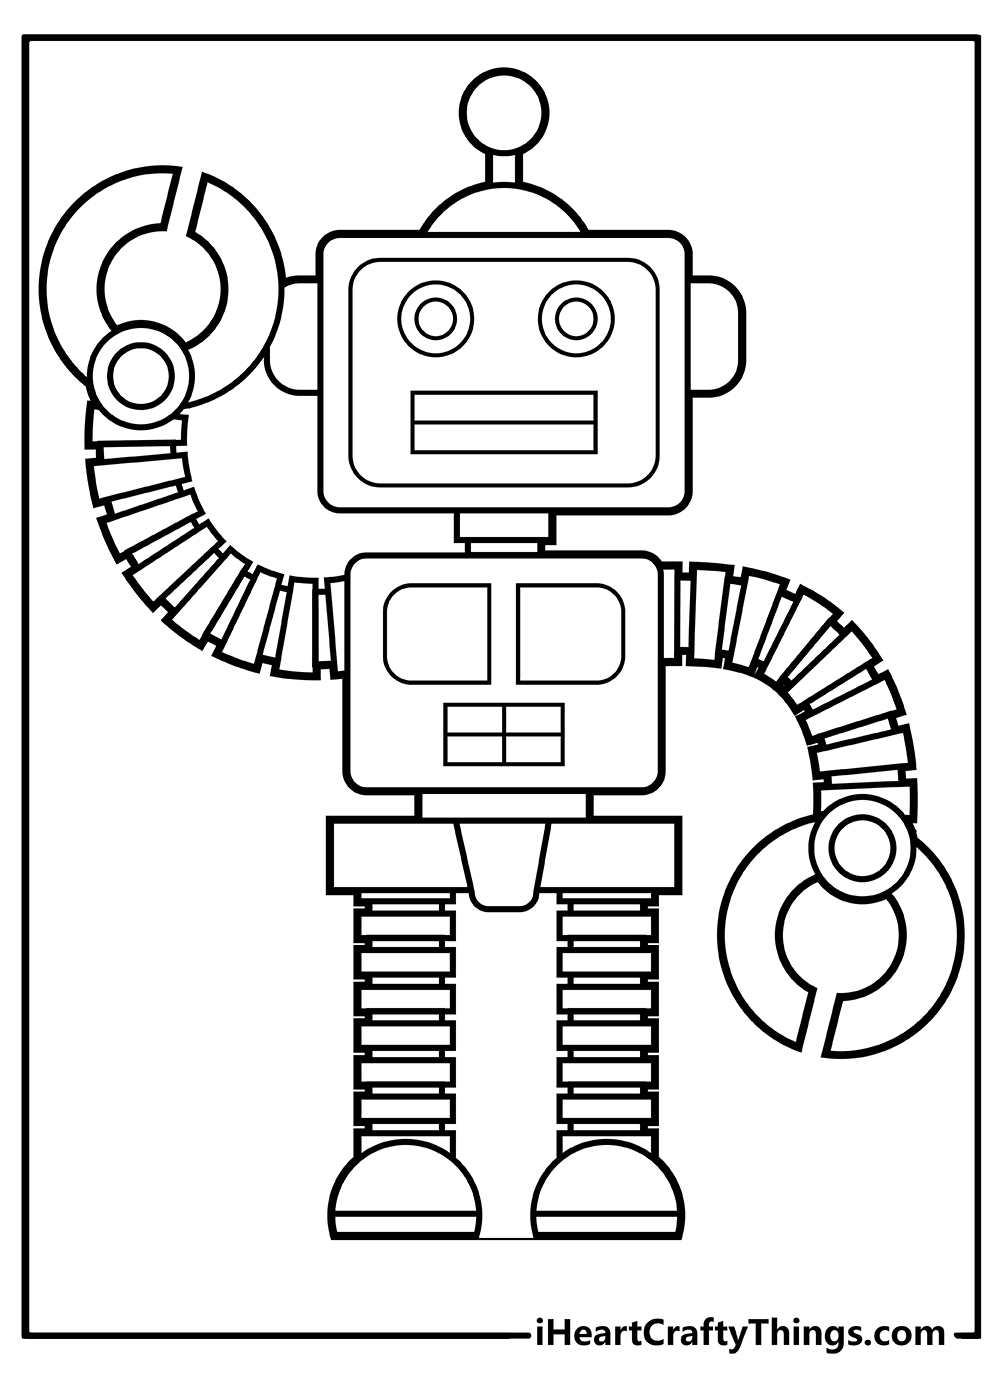 Robot Coloring Pages free download